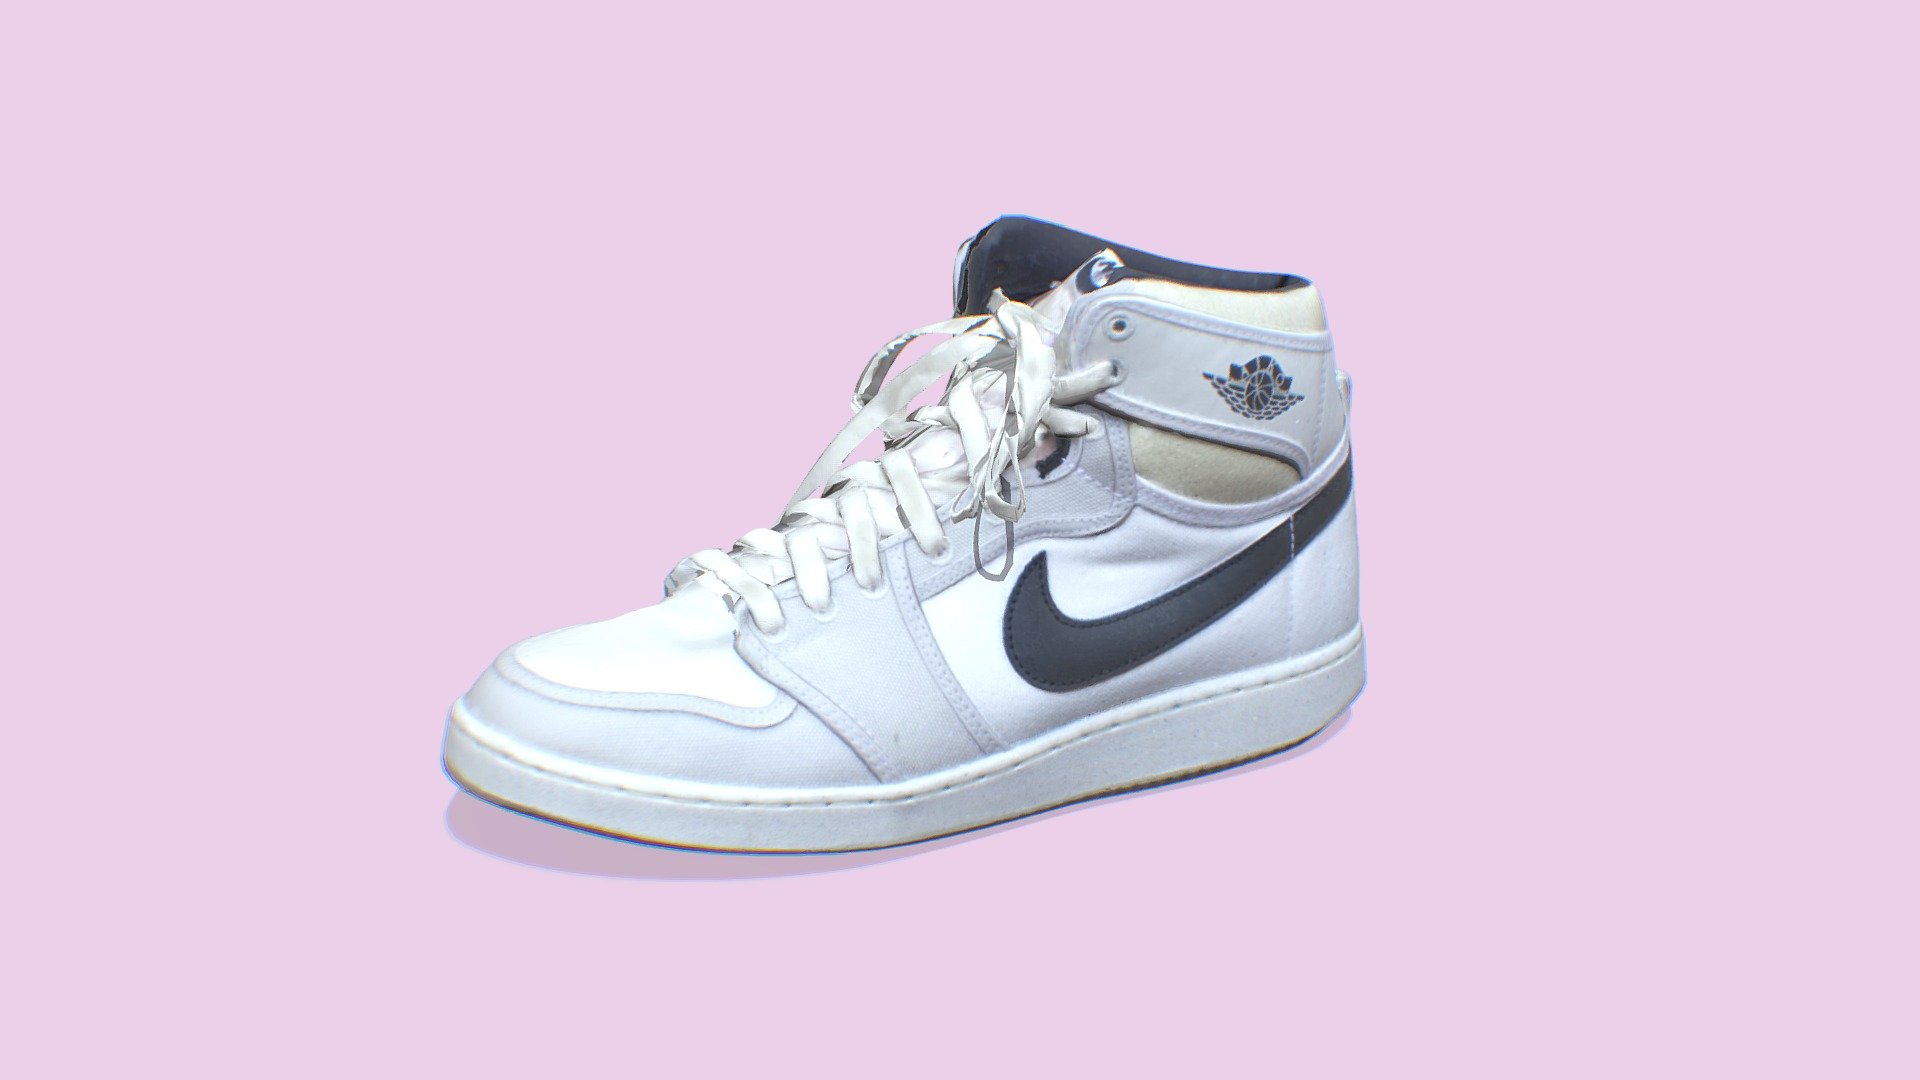 Hi! I did a retopo and some other stuff on a Photo Scan model of a pair of Nike air Jordans :)    

Credit to: https://sketchfab.com/MUSHROOM_BUILDS I used his original 3D scan model and made a retopo etc on it for a school project :) 

(I know the laces got a bit crazy) - Nike air Jordans Retopo - Download Free 3D model by SofiaWolfie 3d model